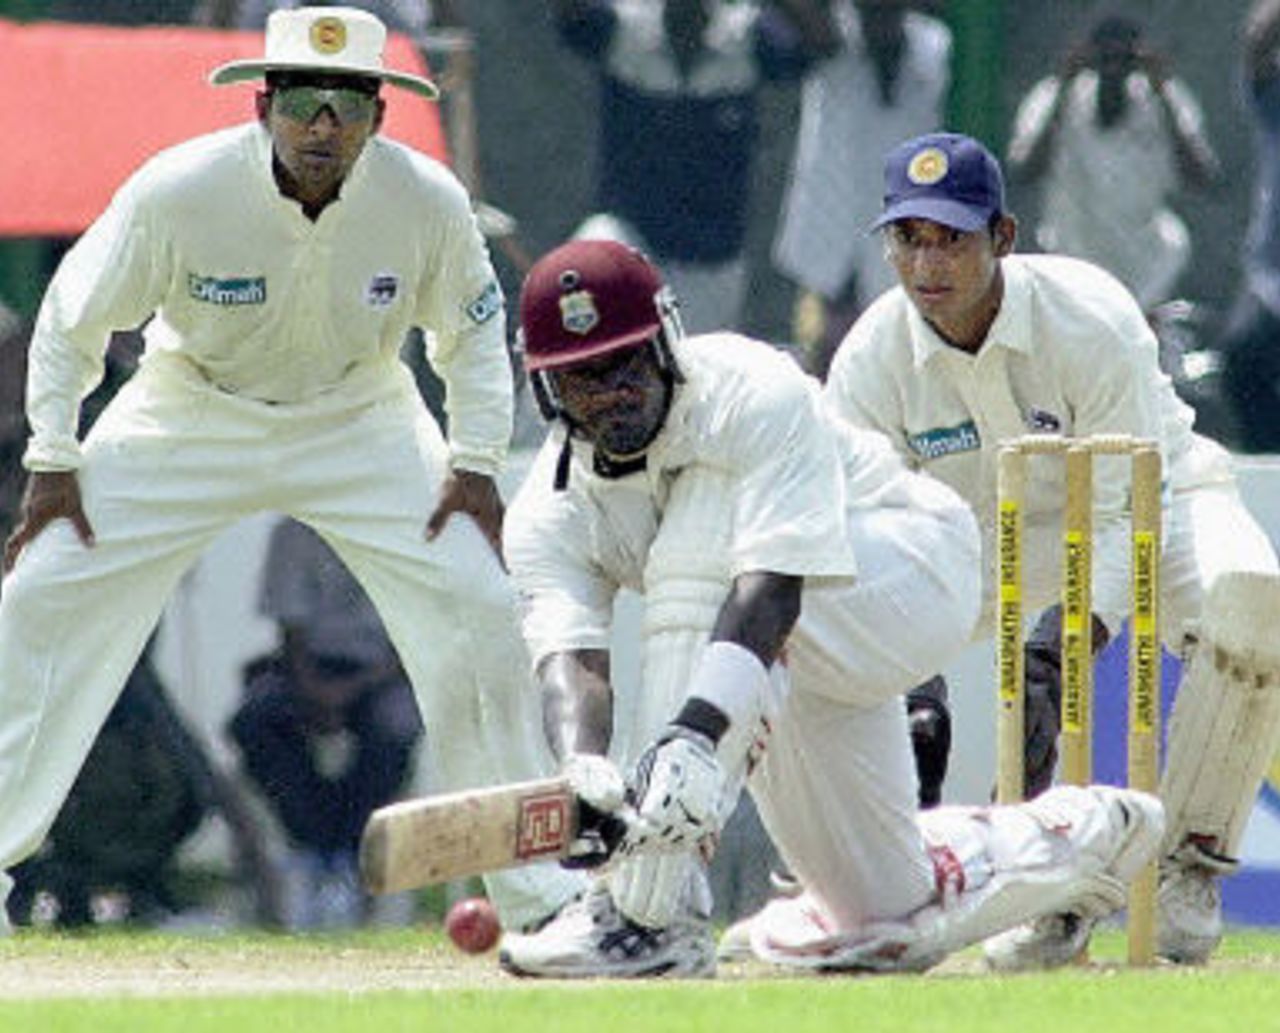 West Indies skipper Carl Hooper sweeps a ball as Mahela Jayawardena and wicketkeeper Kumar Sangakkara looks on during the Second day of the first cricket test match between Sri Lanka and West Indies, 14 November 2001